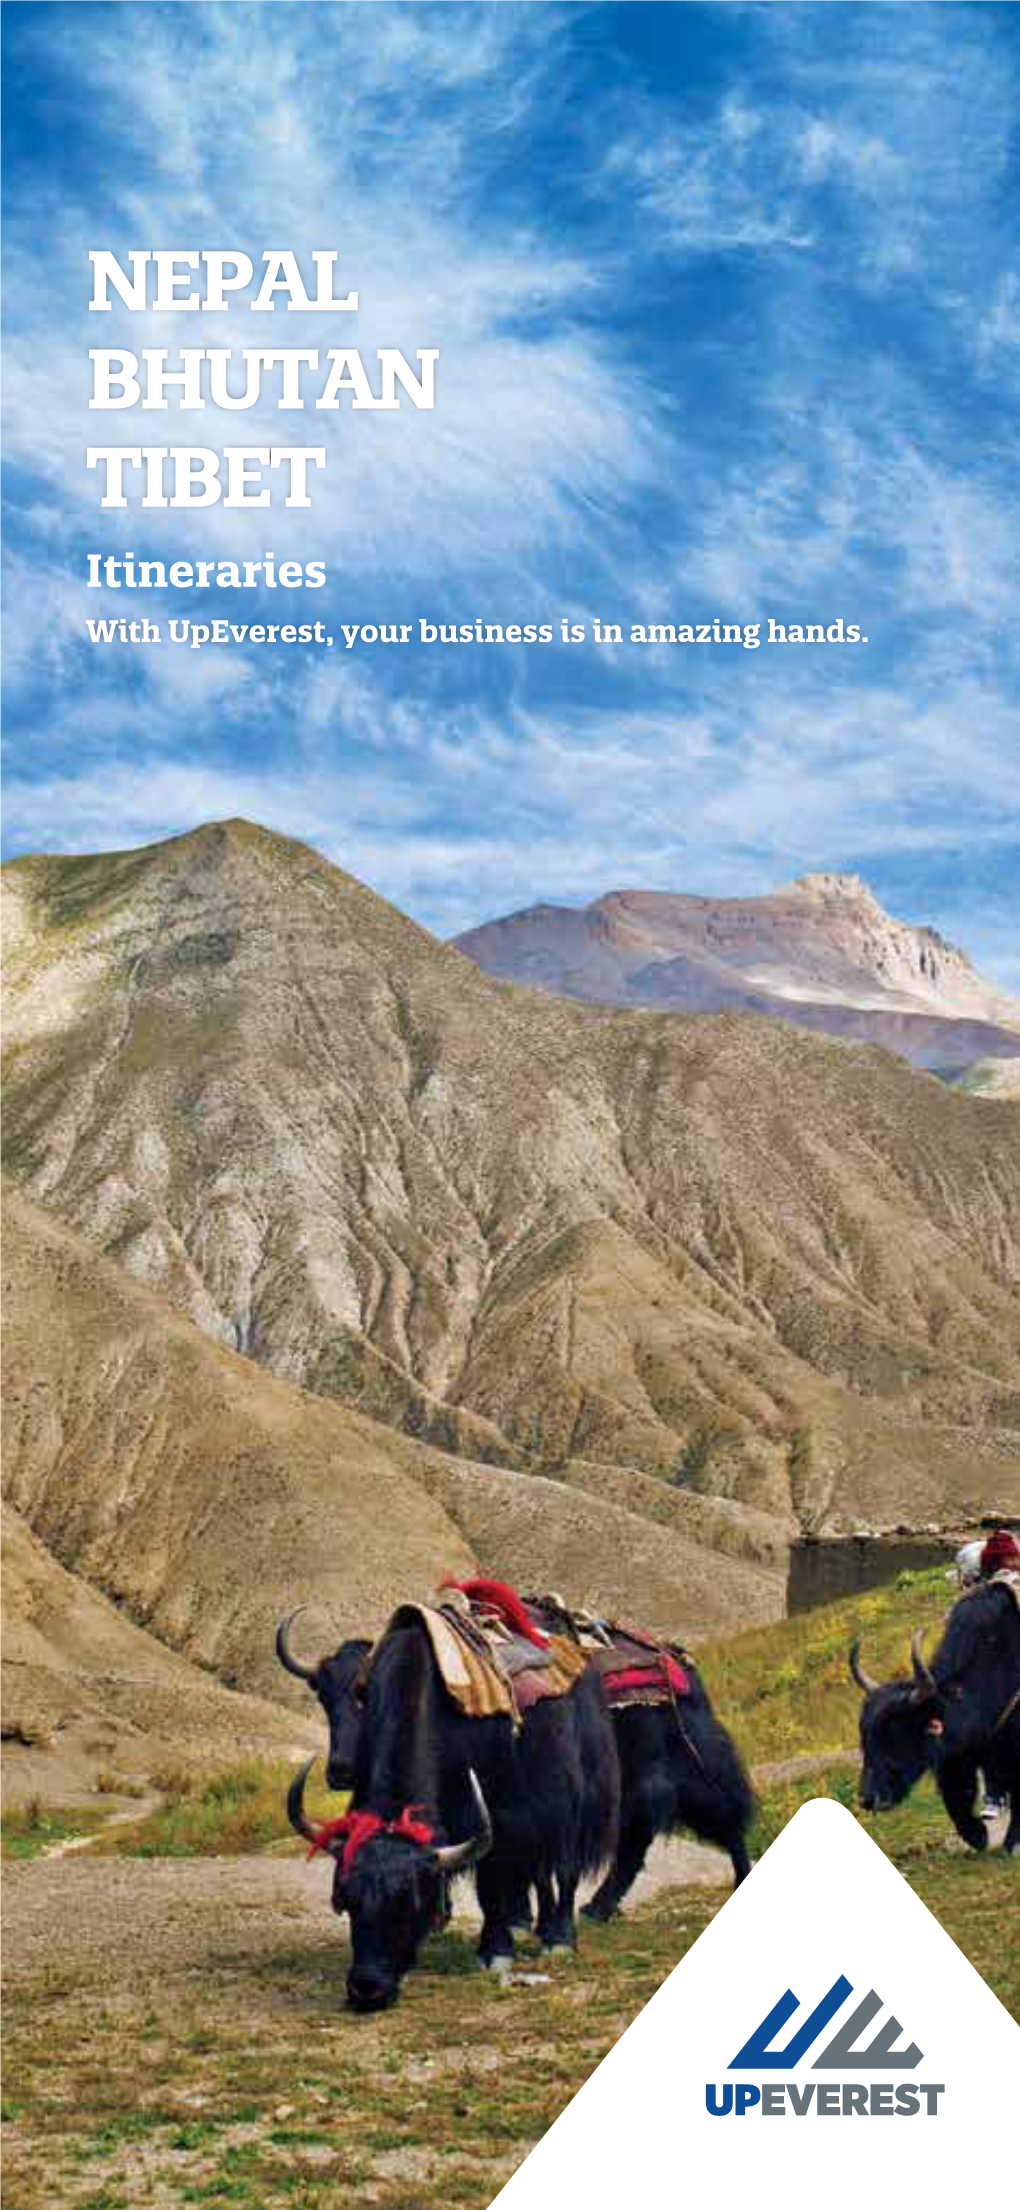 NEPAL BHUTAN TIBET Itineraries with Upeverest, Your Business Is in Amazing Hands